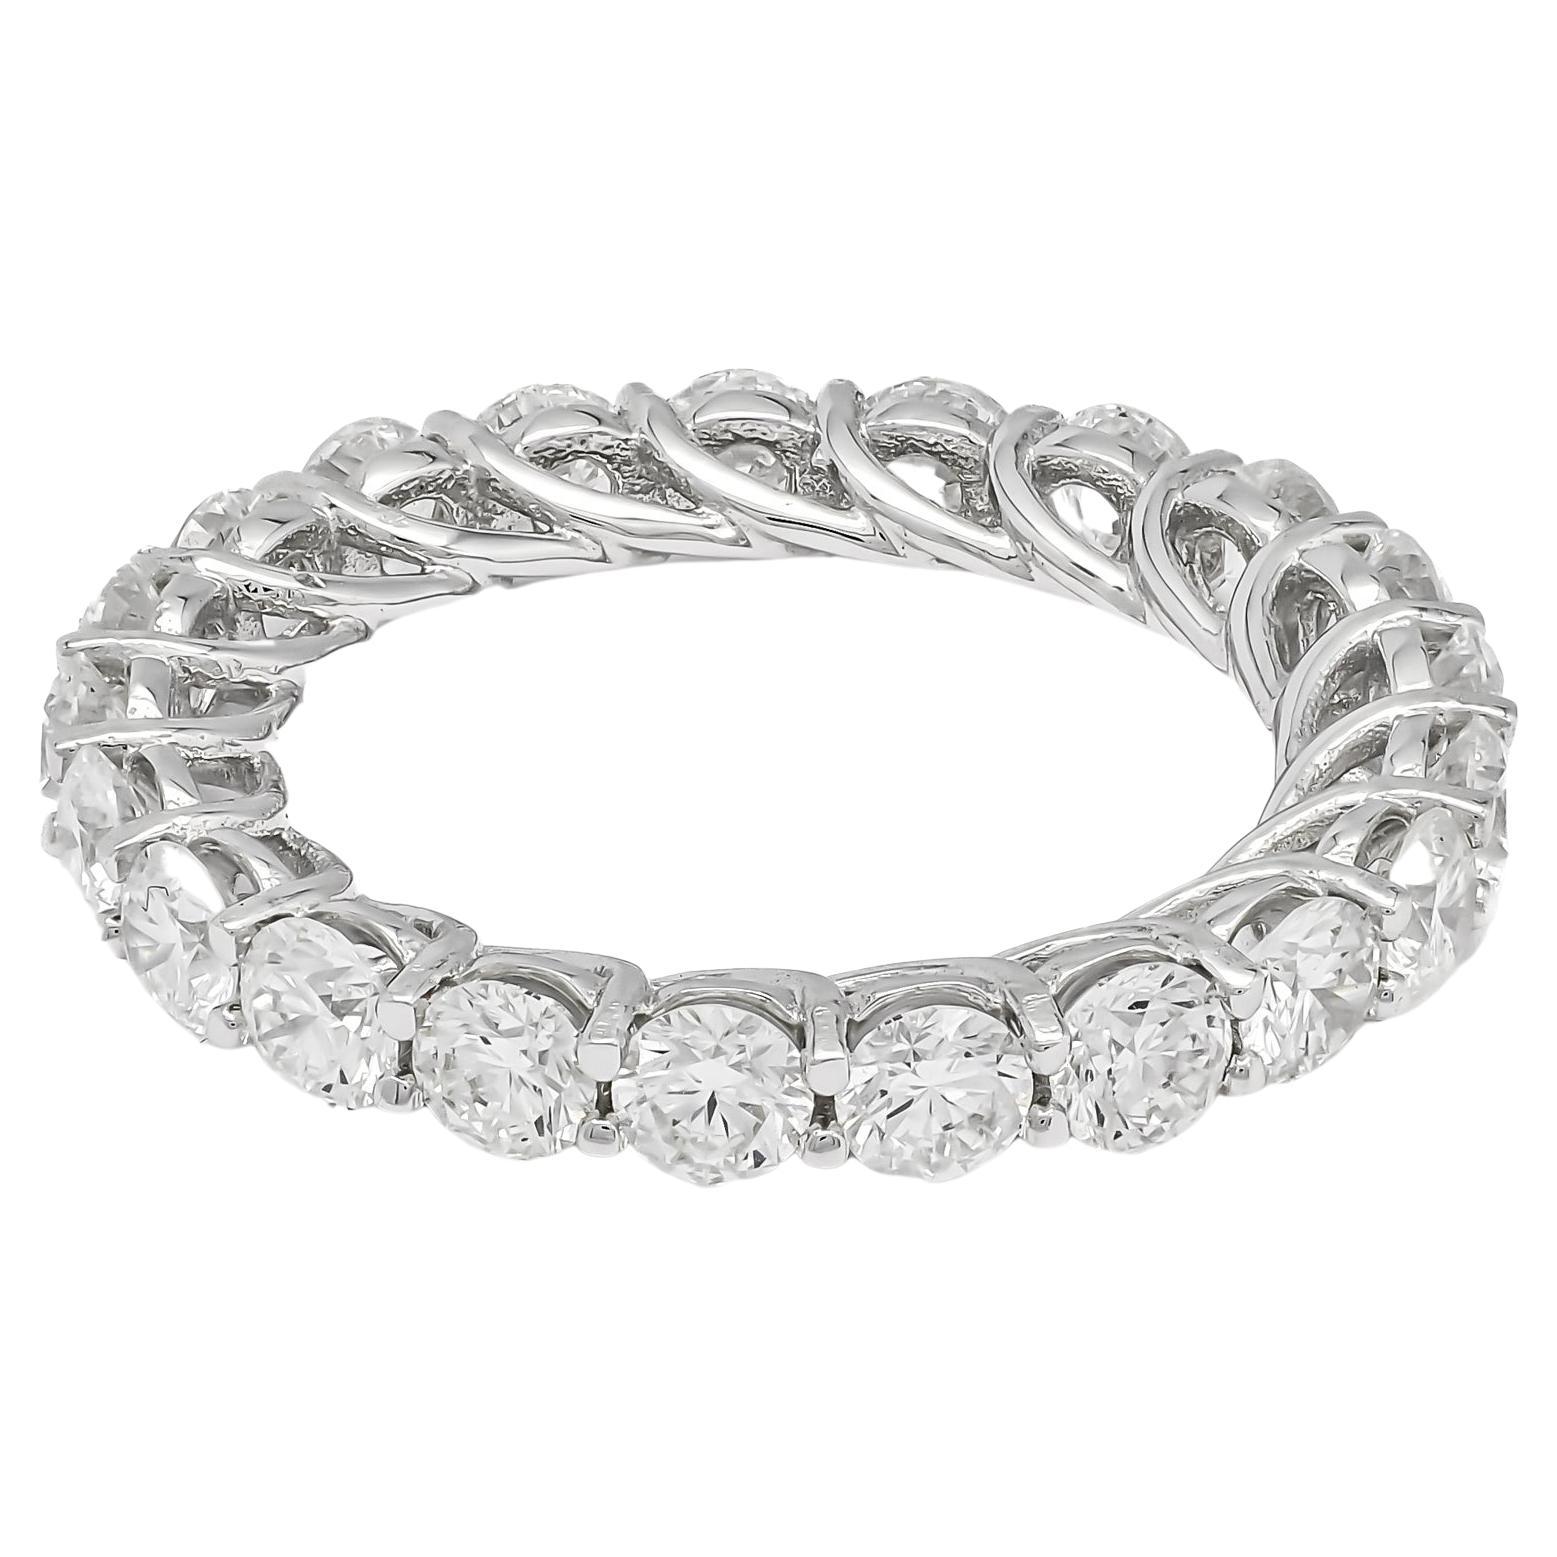 3.15 Carat Full Eternity Natural Diamond Ring in White Gold with 4 Prongs